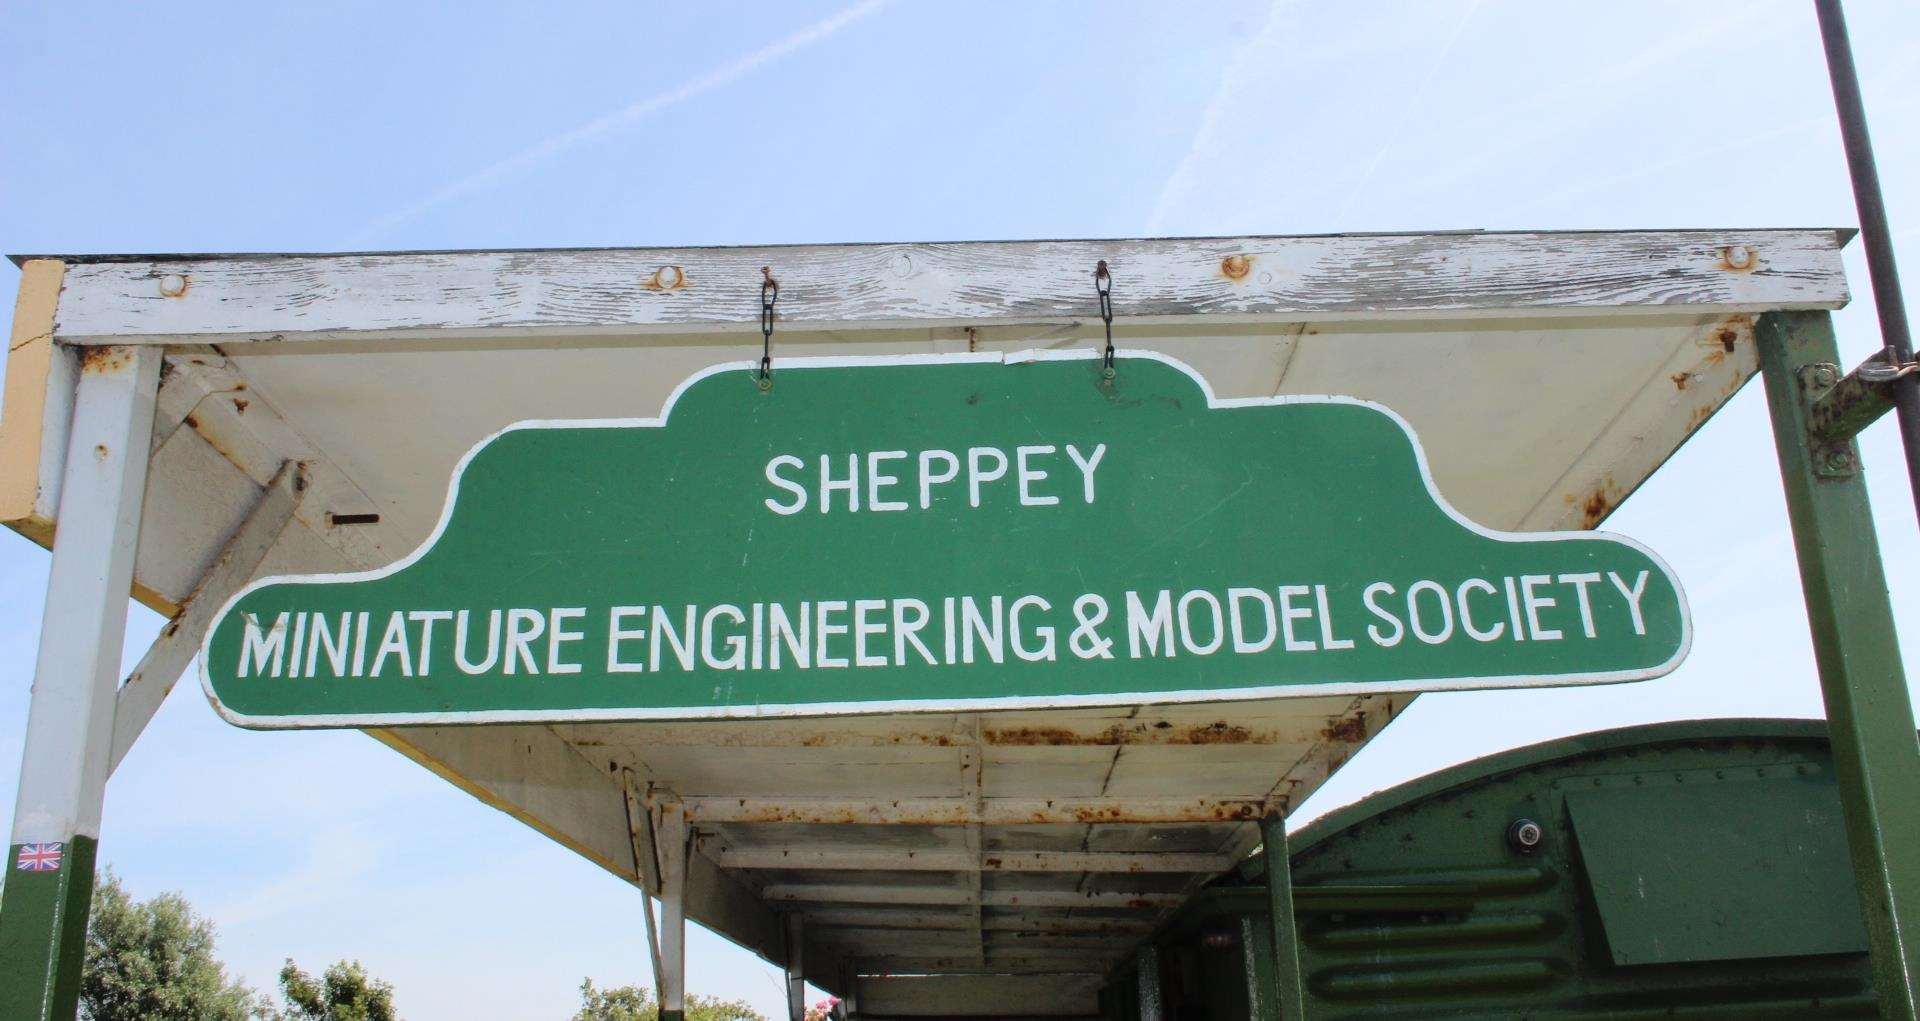 Station sign at the Sheppey Miniature Engineering and Model Society at Barton's Point, Sheerness (2713881)